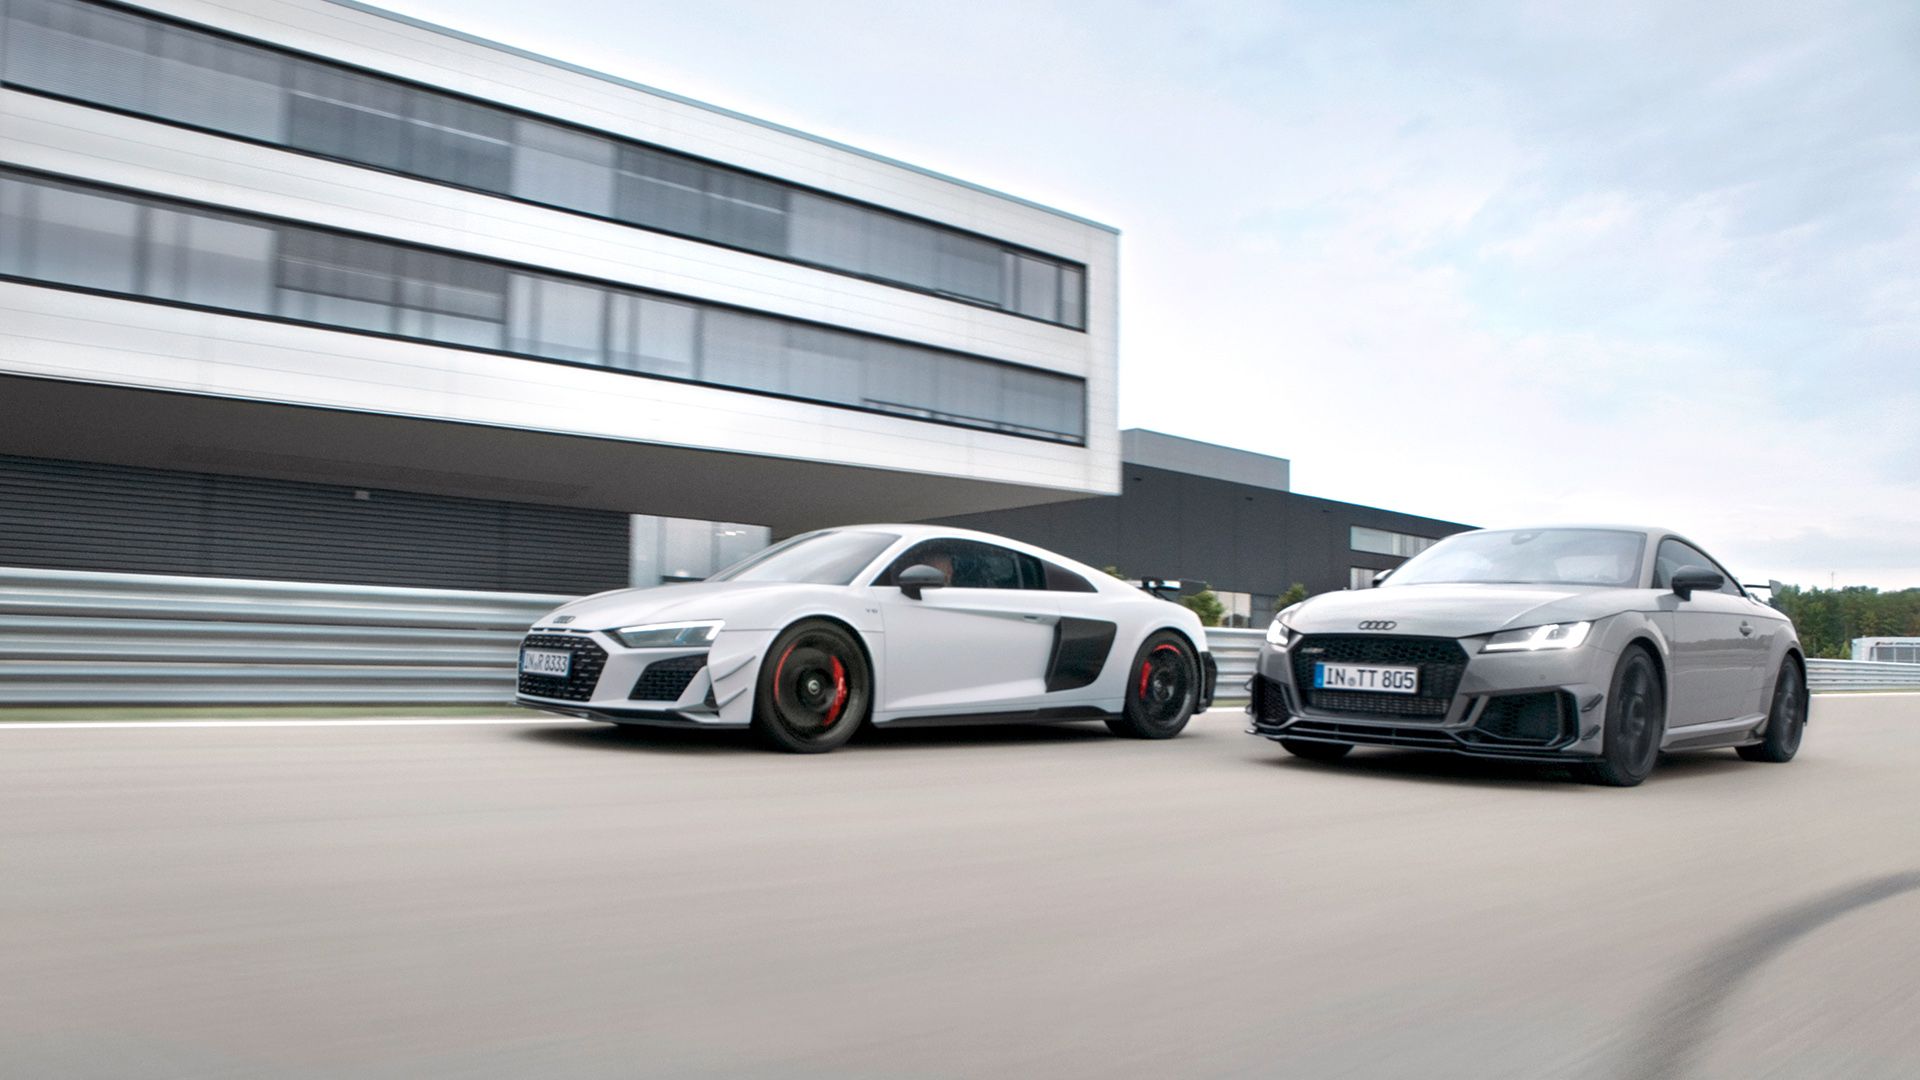 Audi R8 GT and Audi TT RS Coupé iconic edition drive side by side on a racetrack.